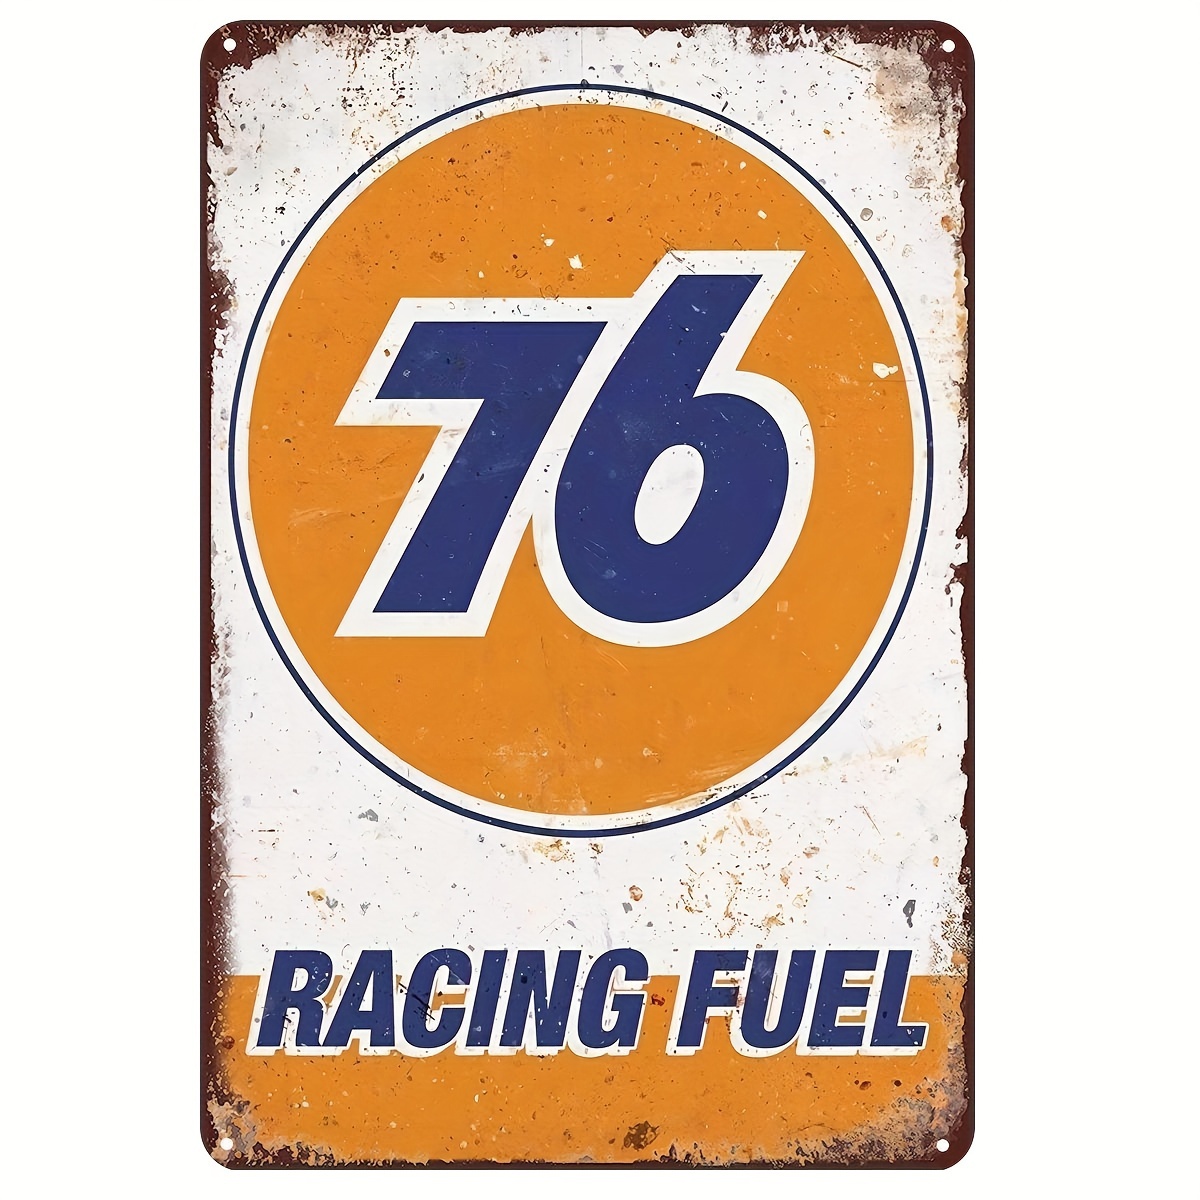 

76 Racing Fuel Vintage Metal Tin Sign - Retro Iron Plaque Wall Decor For Home, Club, Bar, Man Cave, Garage, Farm - 12x8 Inch - Weather Resistant, Pre-drilled, Durable Gauge Steel (1 Pc)